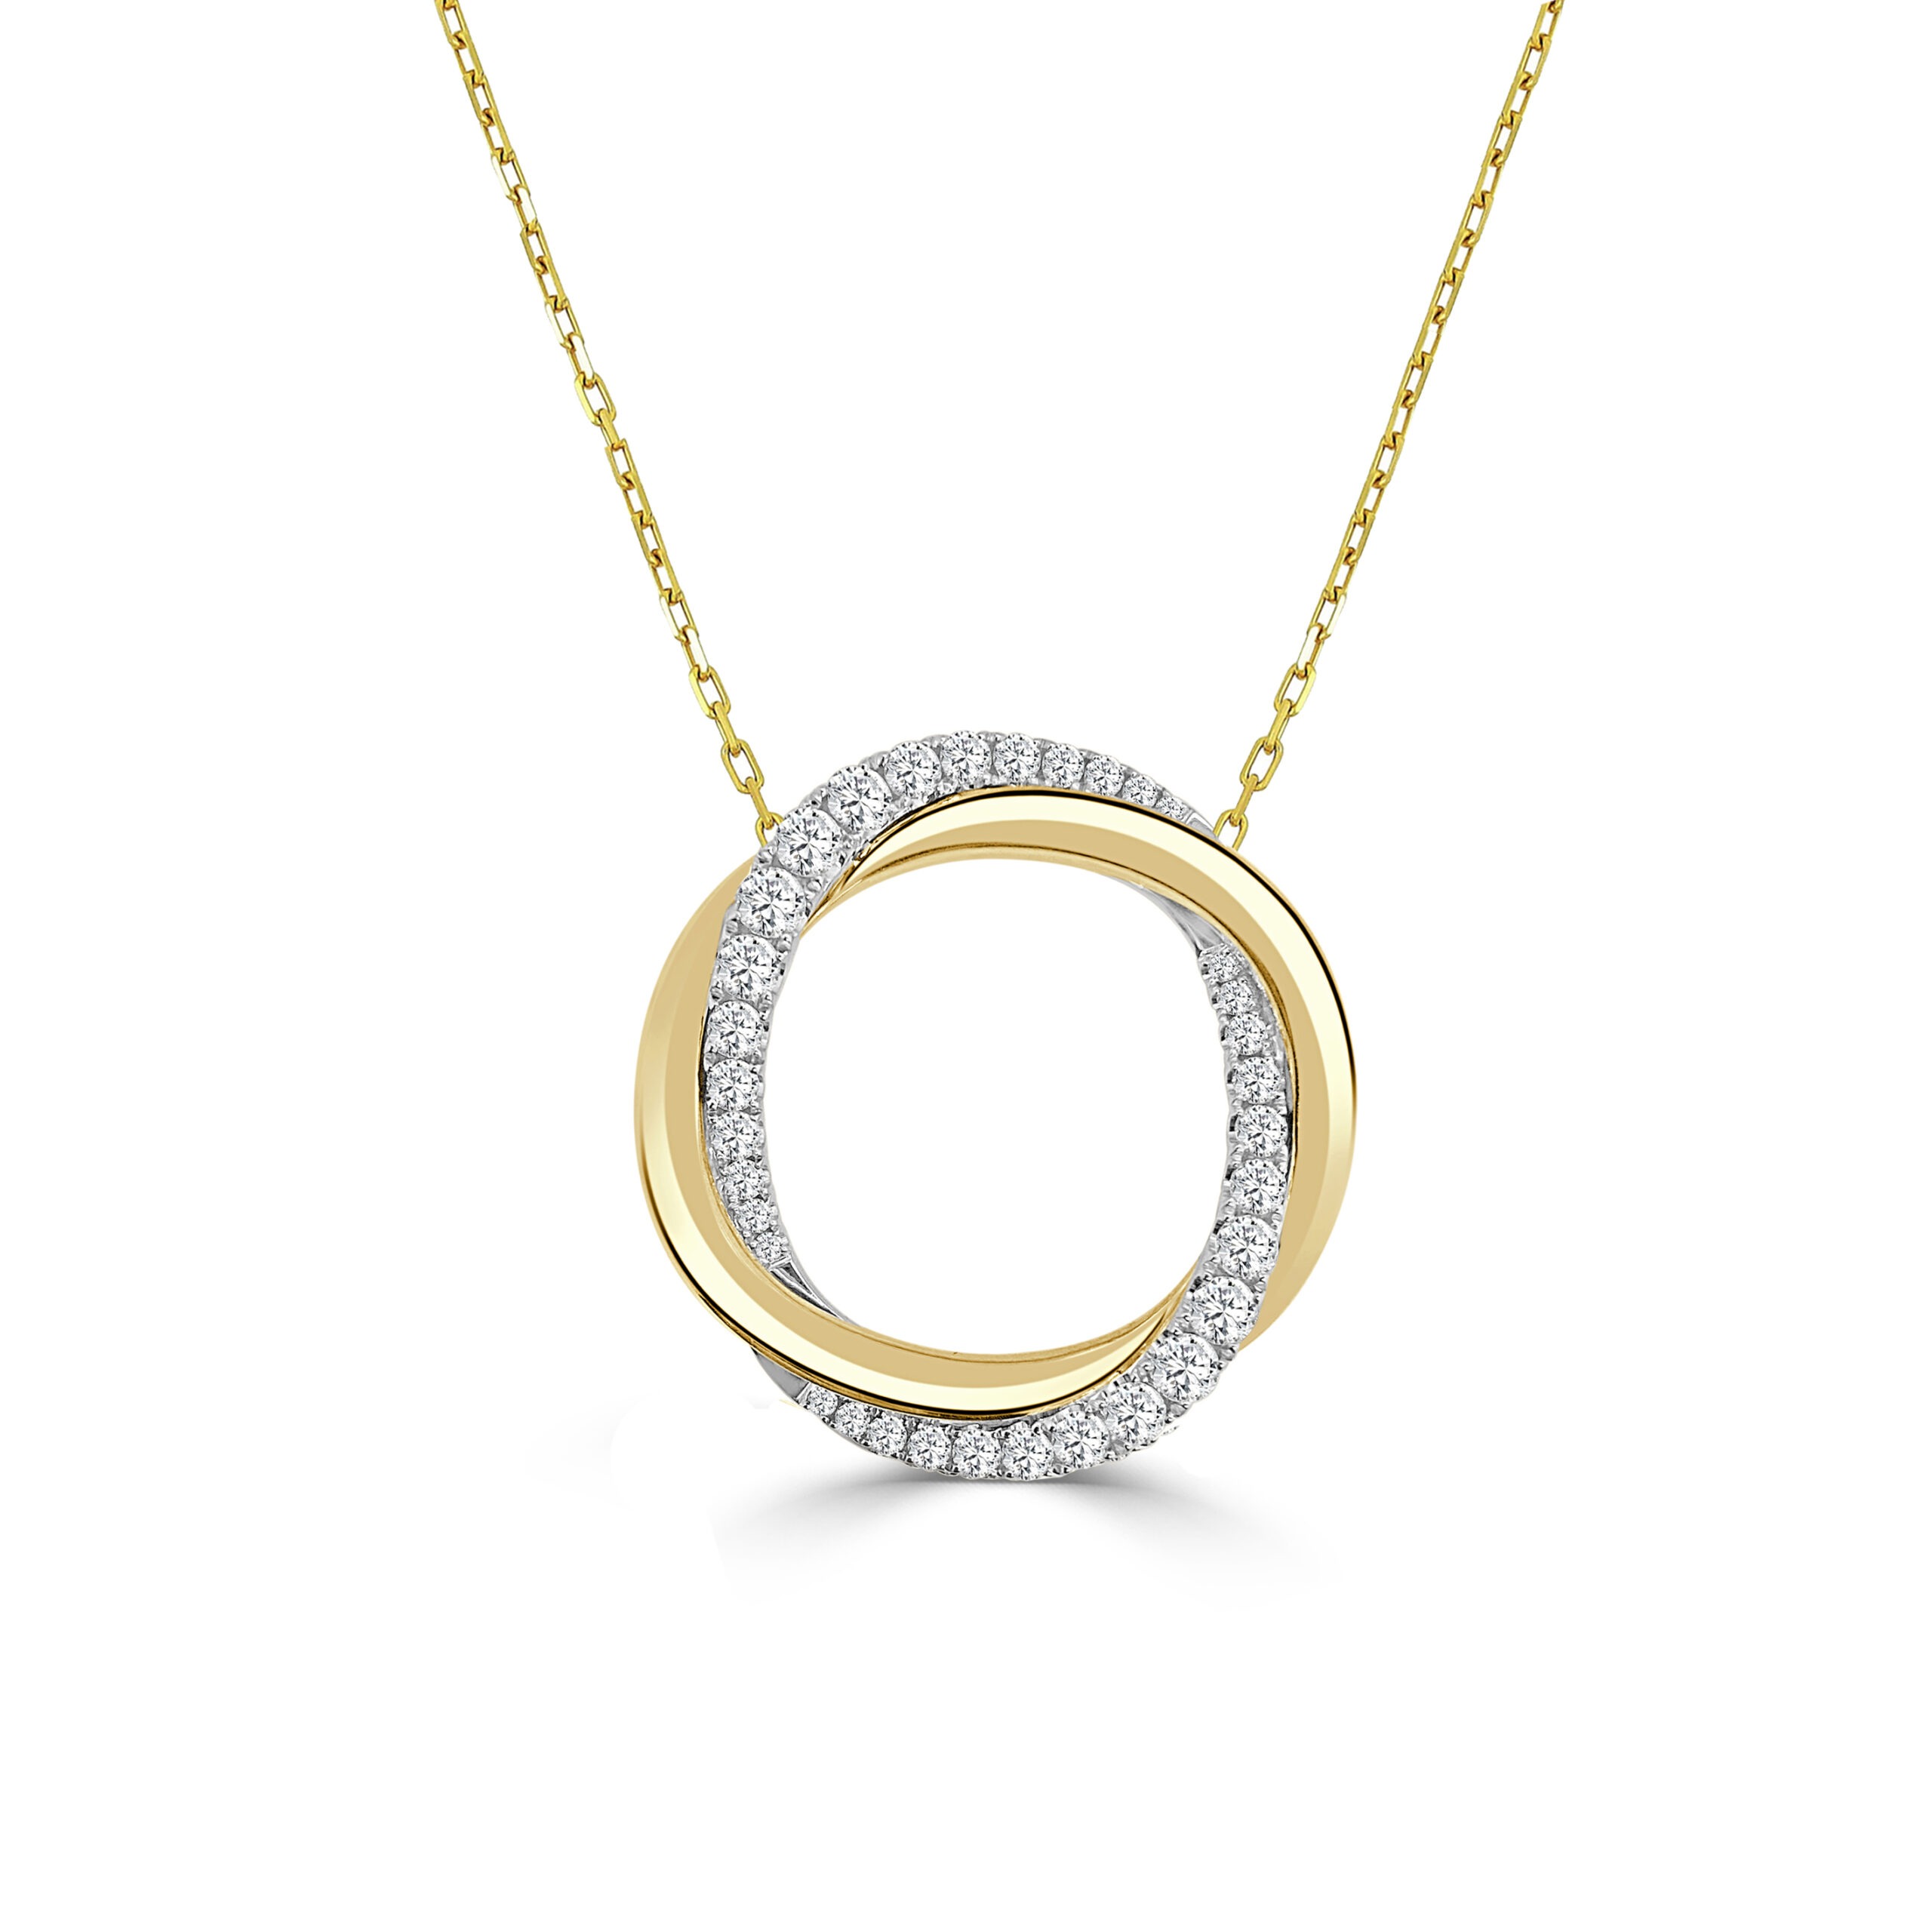 1ctw Diamond Twisted Circle Two-Tone Pendant Necklace